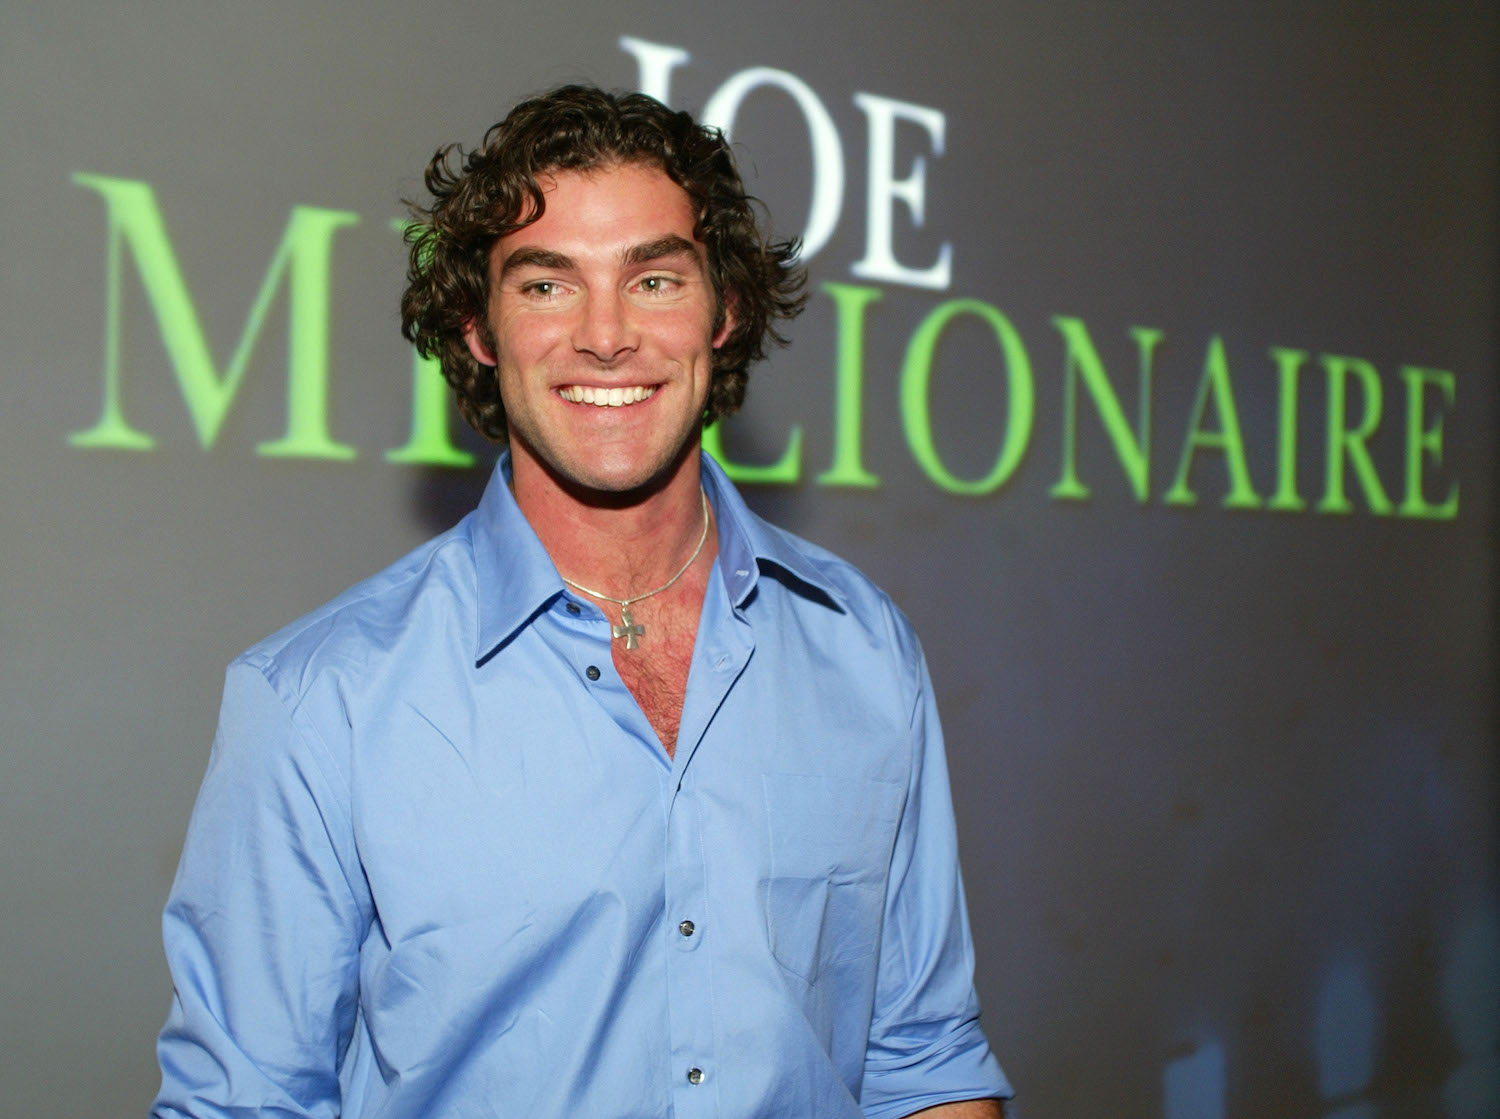 Evan Marriott, who starred in 'Joe Millionaire,' at a promo event wearing a blue button down. 'Joe Millionaire' was one of the first ridiculous reality TV shows.